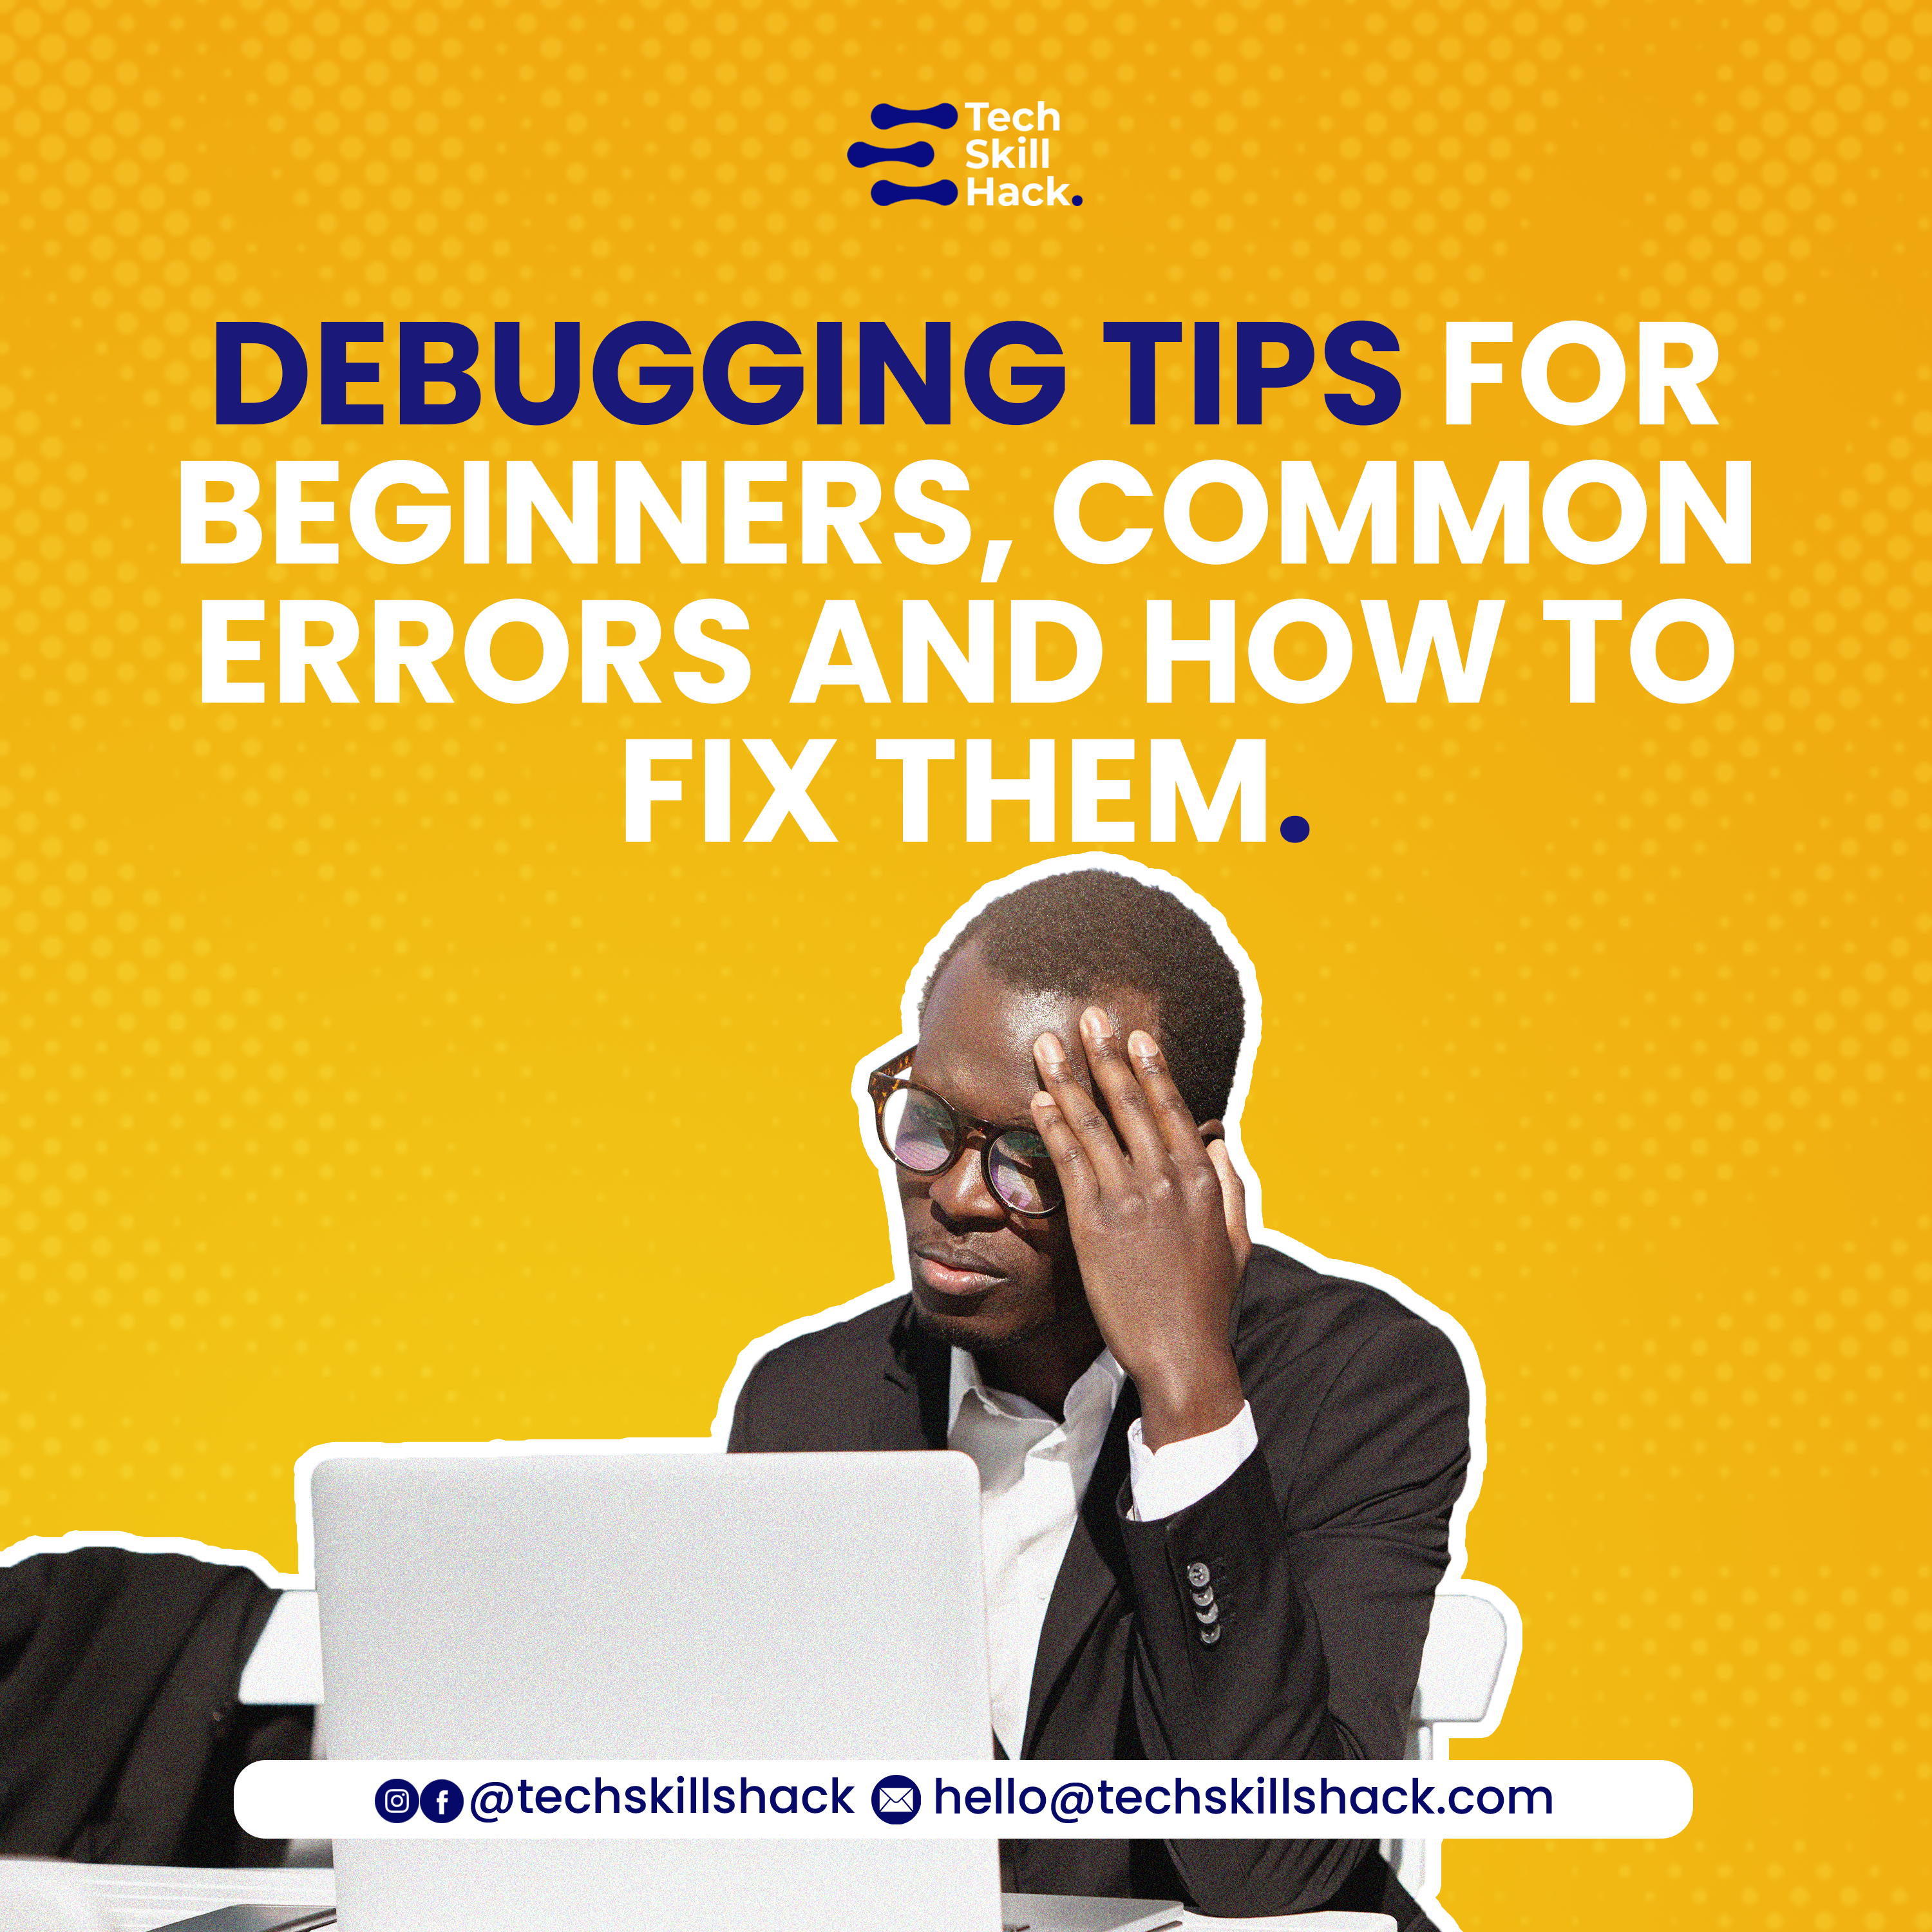 5 EASY DEBUGGING TIPS FOR BEGINNERS, COMMON ERRORS AND HOW TO FIX THEM